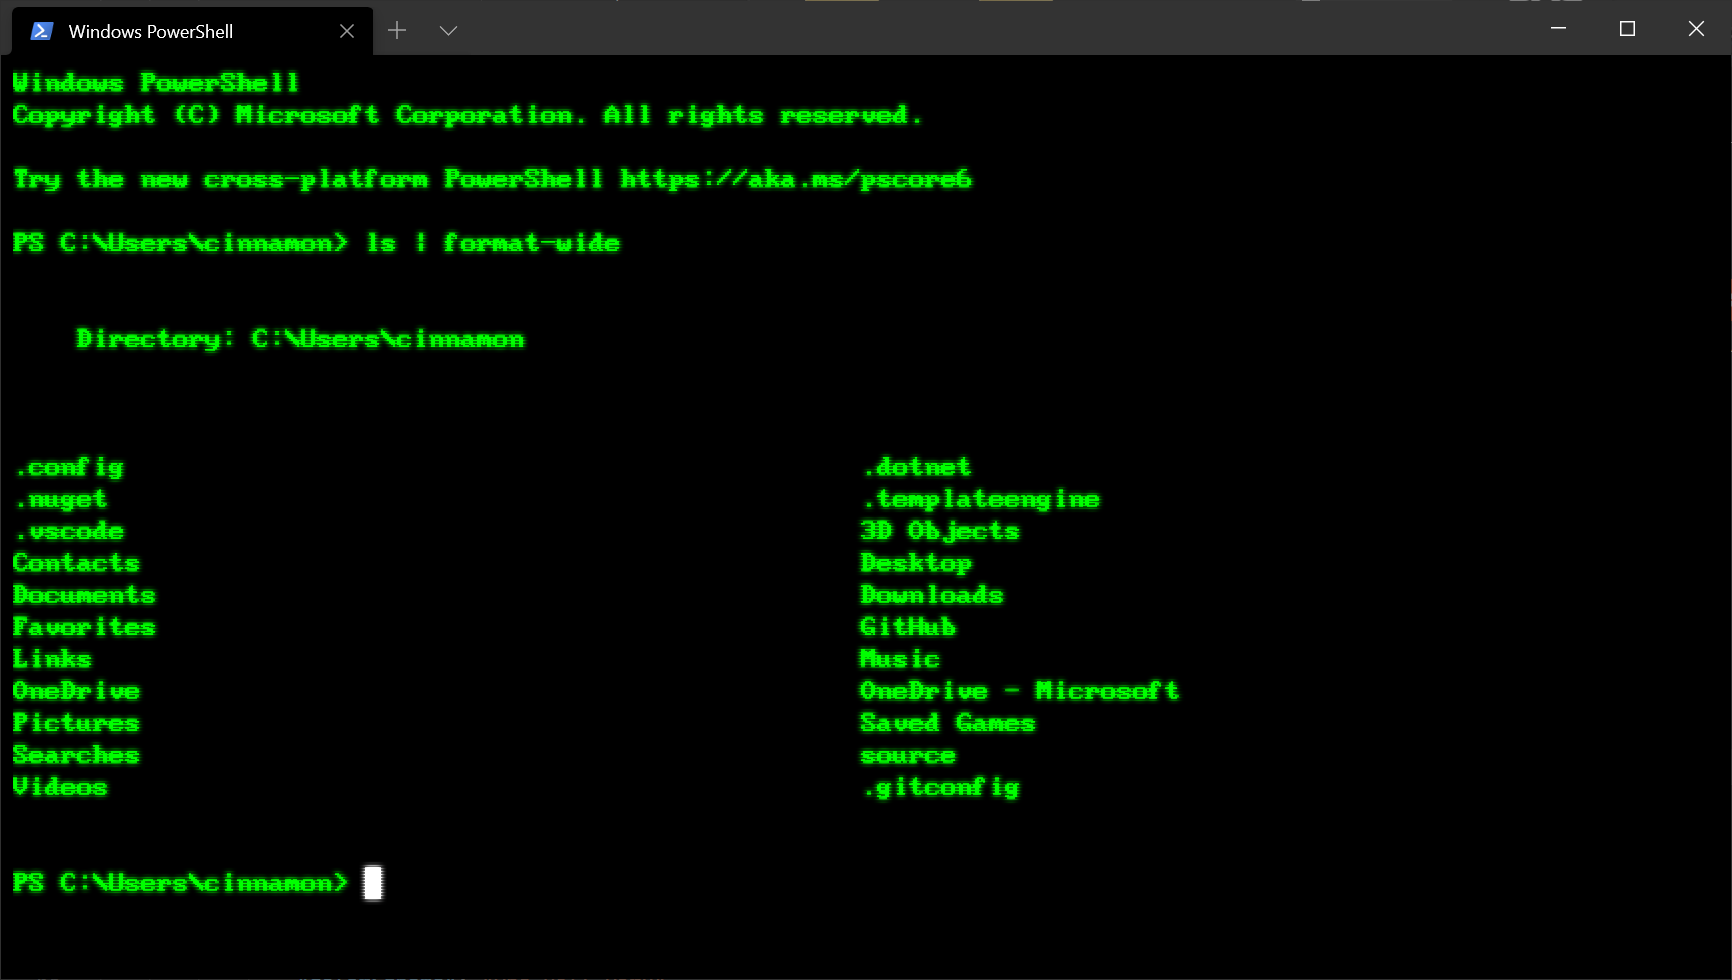 Windows PowerShell and Command Prompt icons